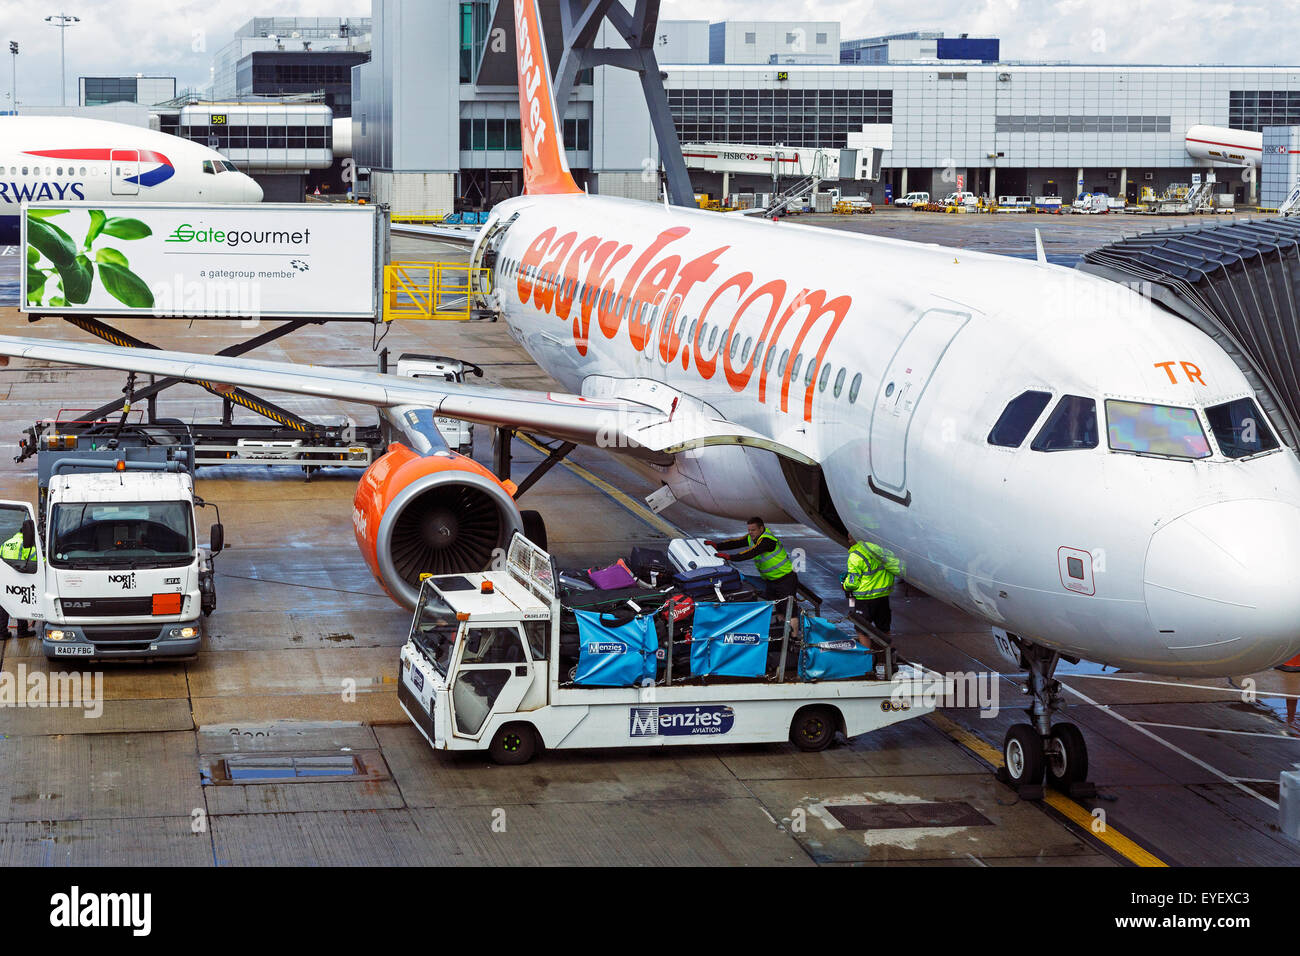 Easyjet plane being loaded with luggage at Gatwick airport, London, England, UK Stock Photo